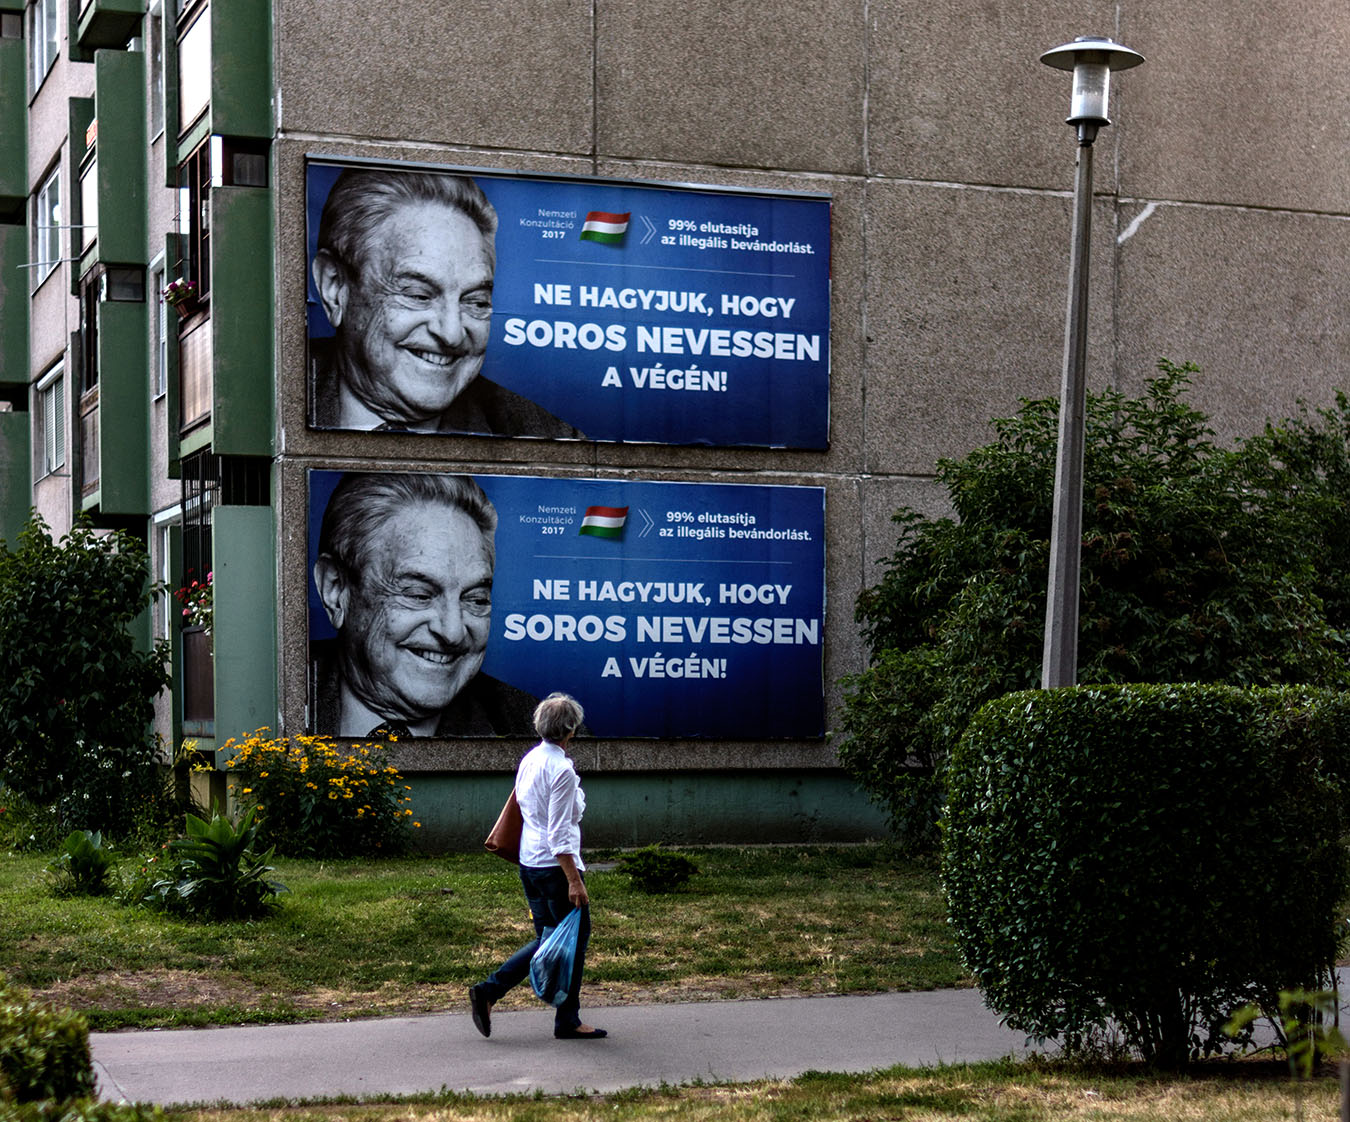 “We will not let Soros have the last laugh” billboards promoting the results of the spring 2017 National Consultation on migration. Photo by Balázs Turay.